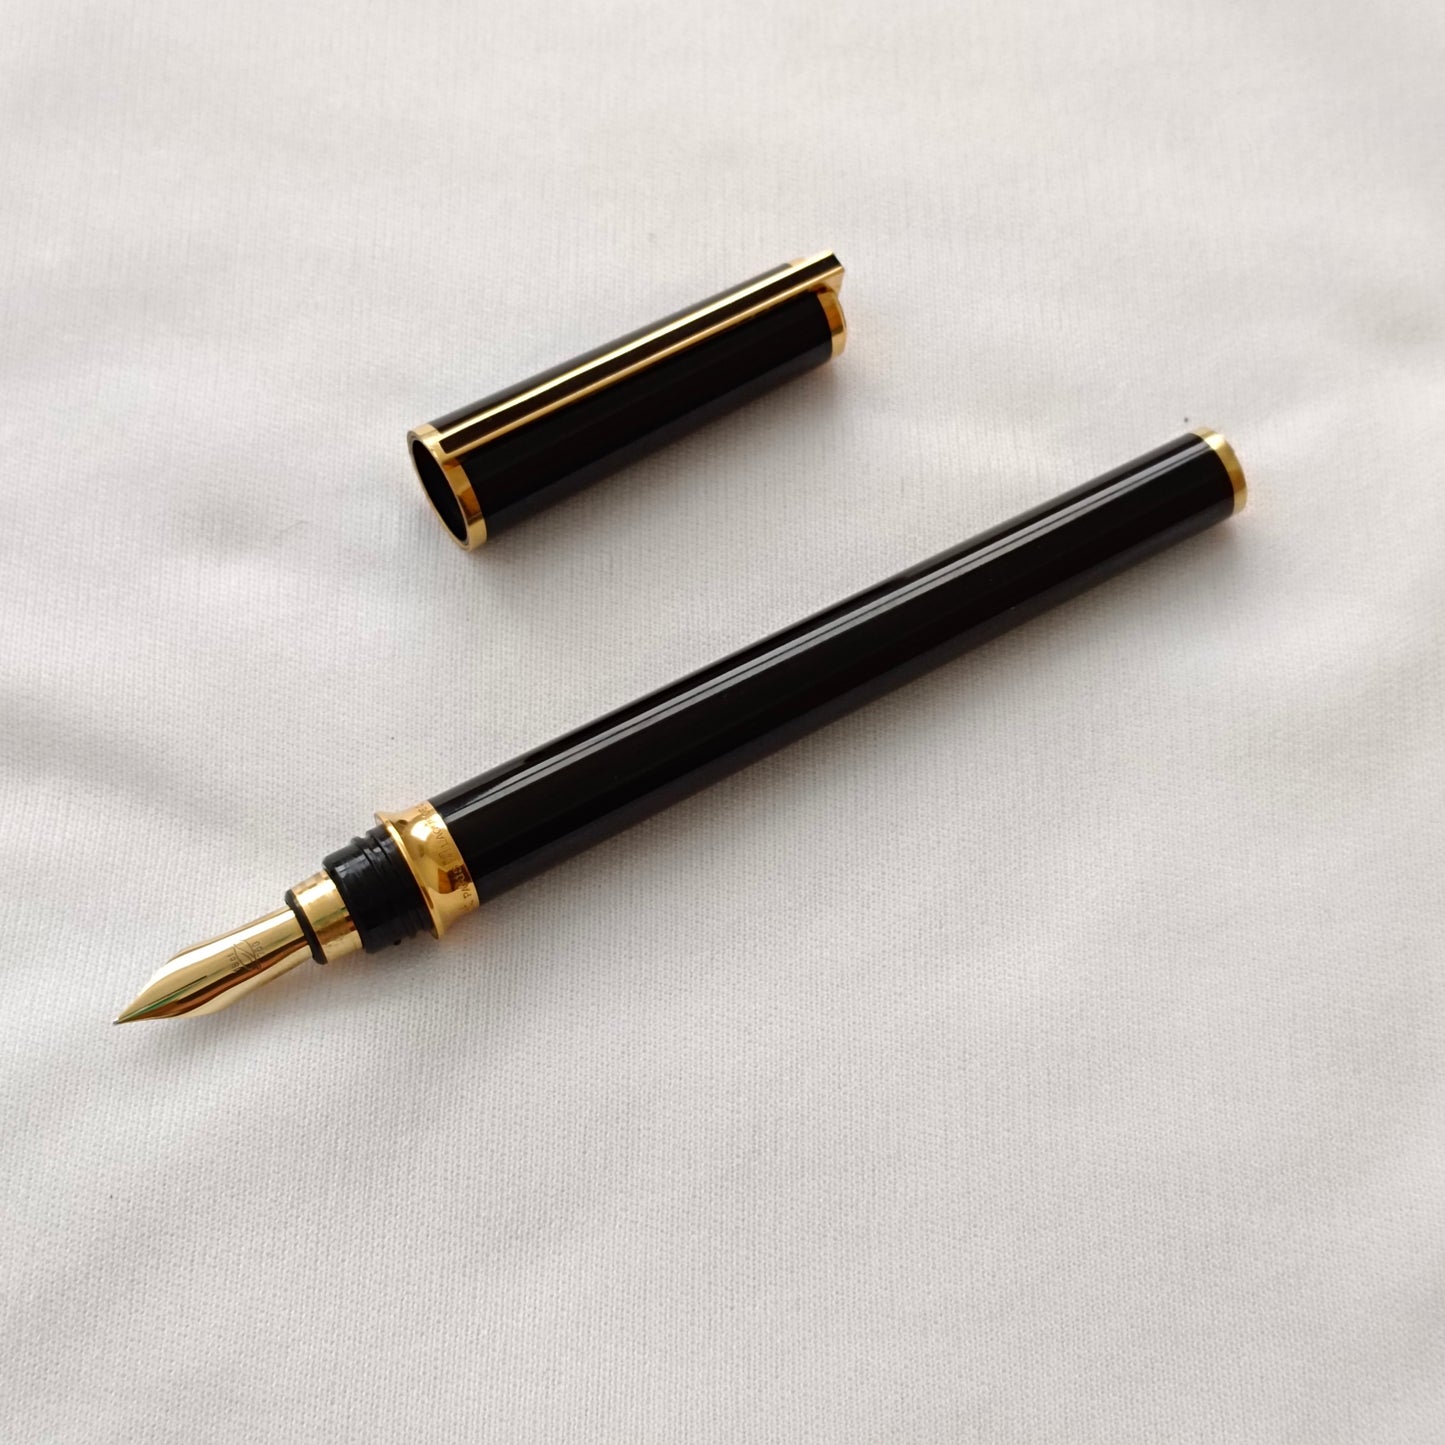 S.T. Dupont Black Lacquer Gatsby Fountain Pen